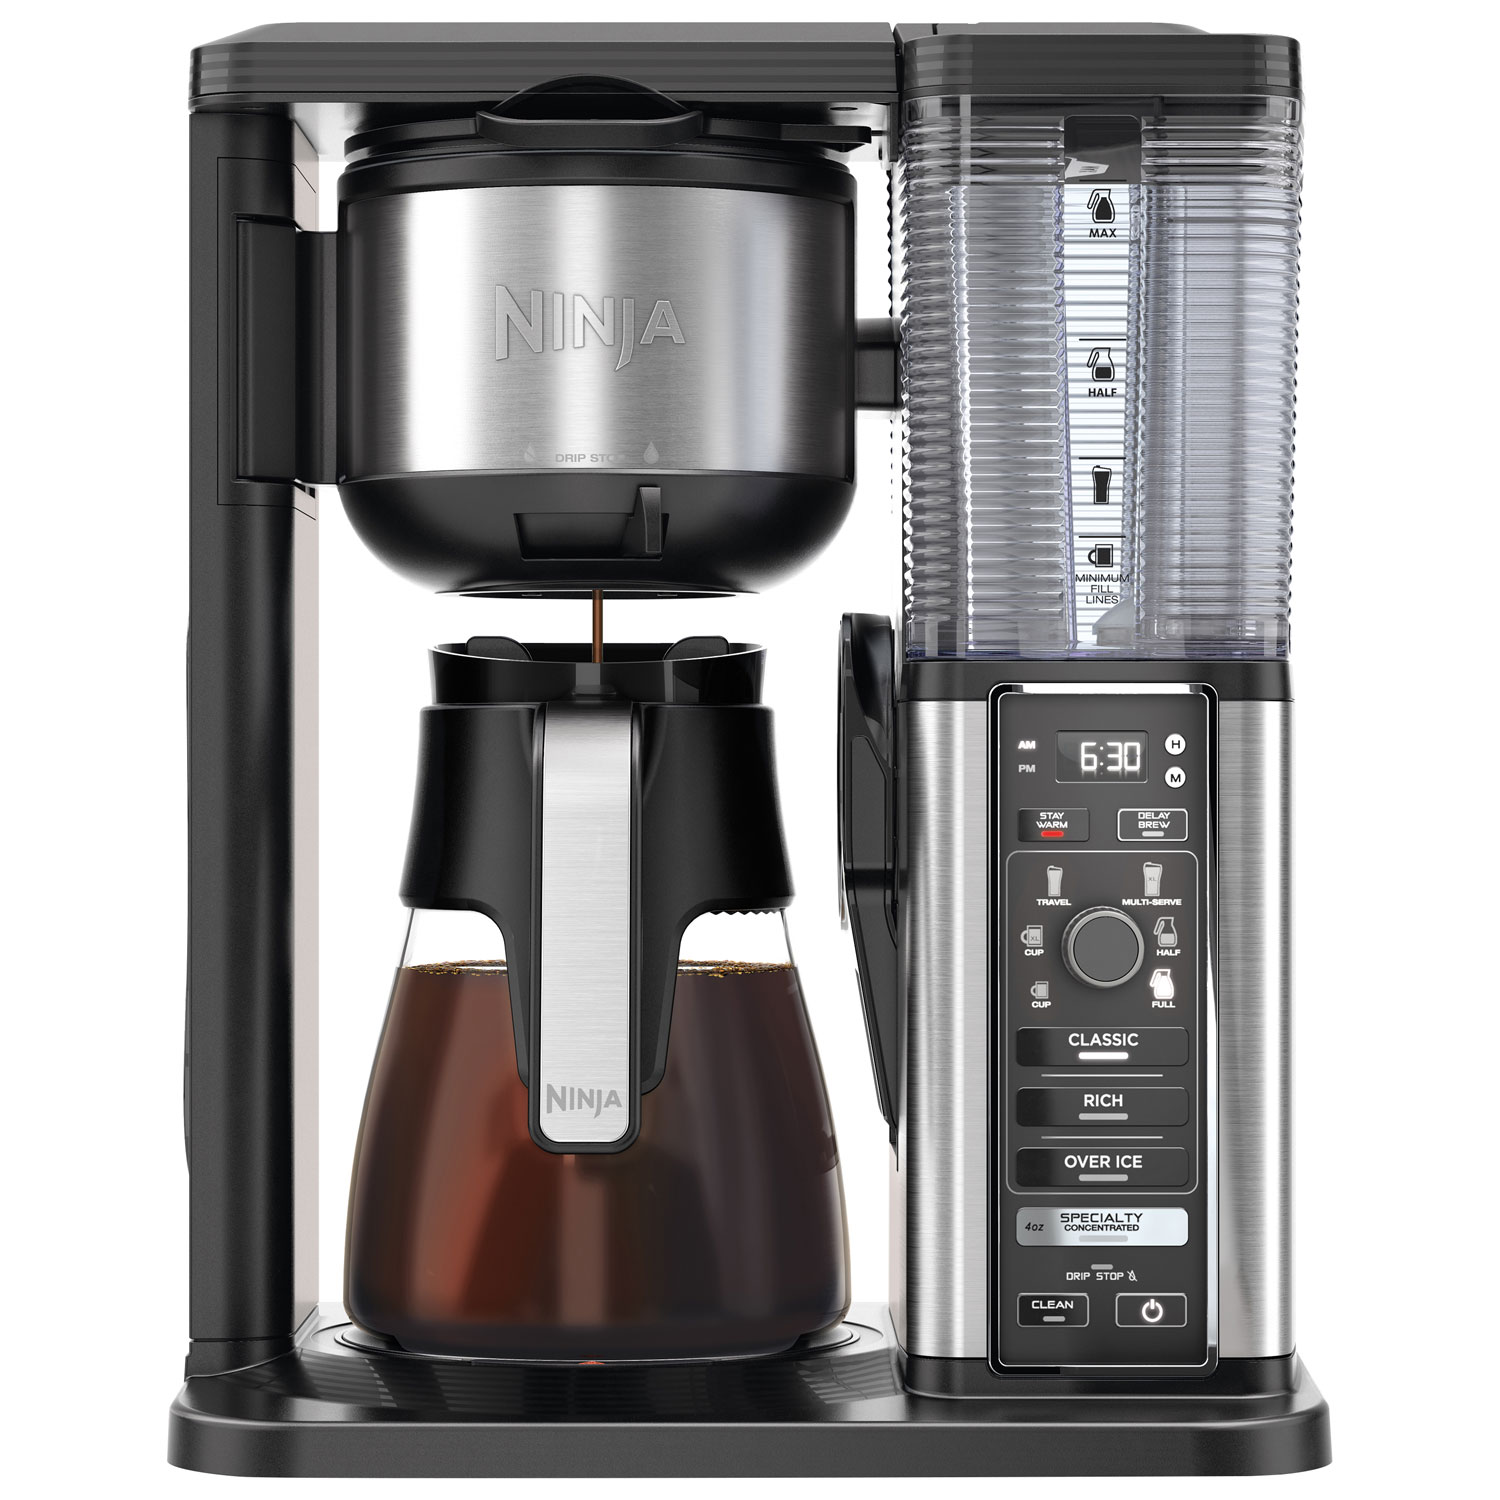 Ninja Specialty Multi-Use Coffee Maker with Milk Frother - 10 Cup - Black - Only at Best Buy